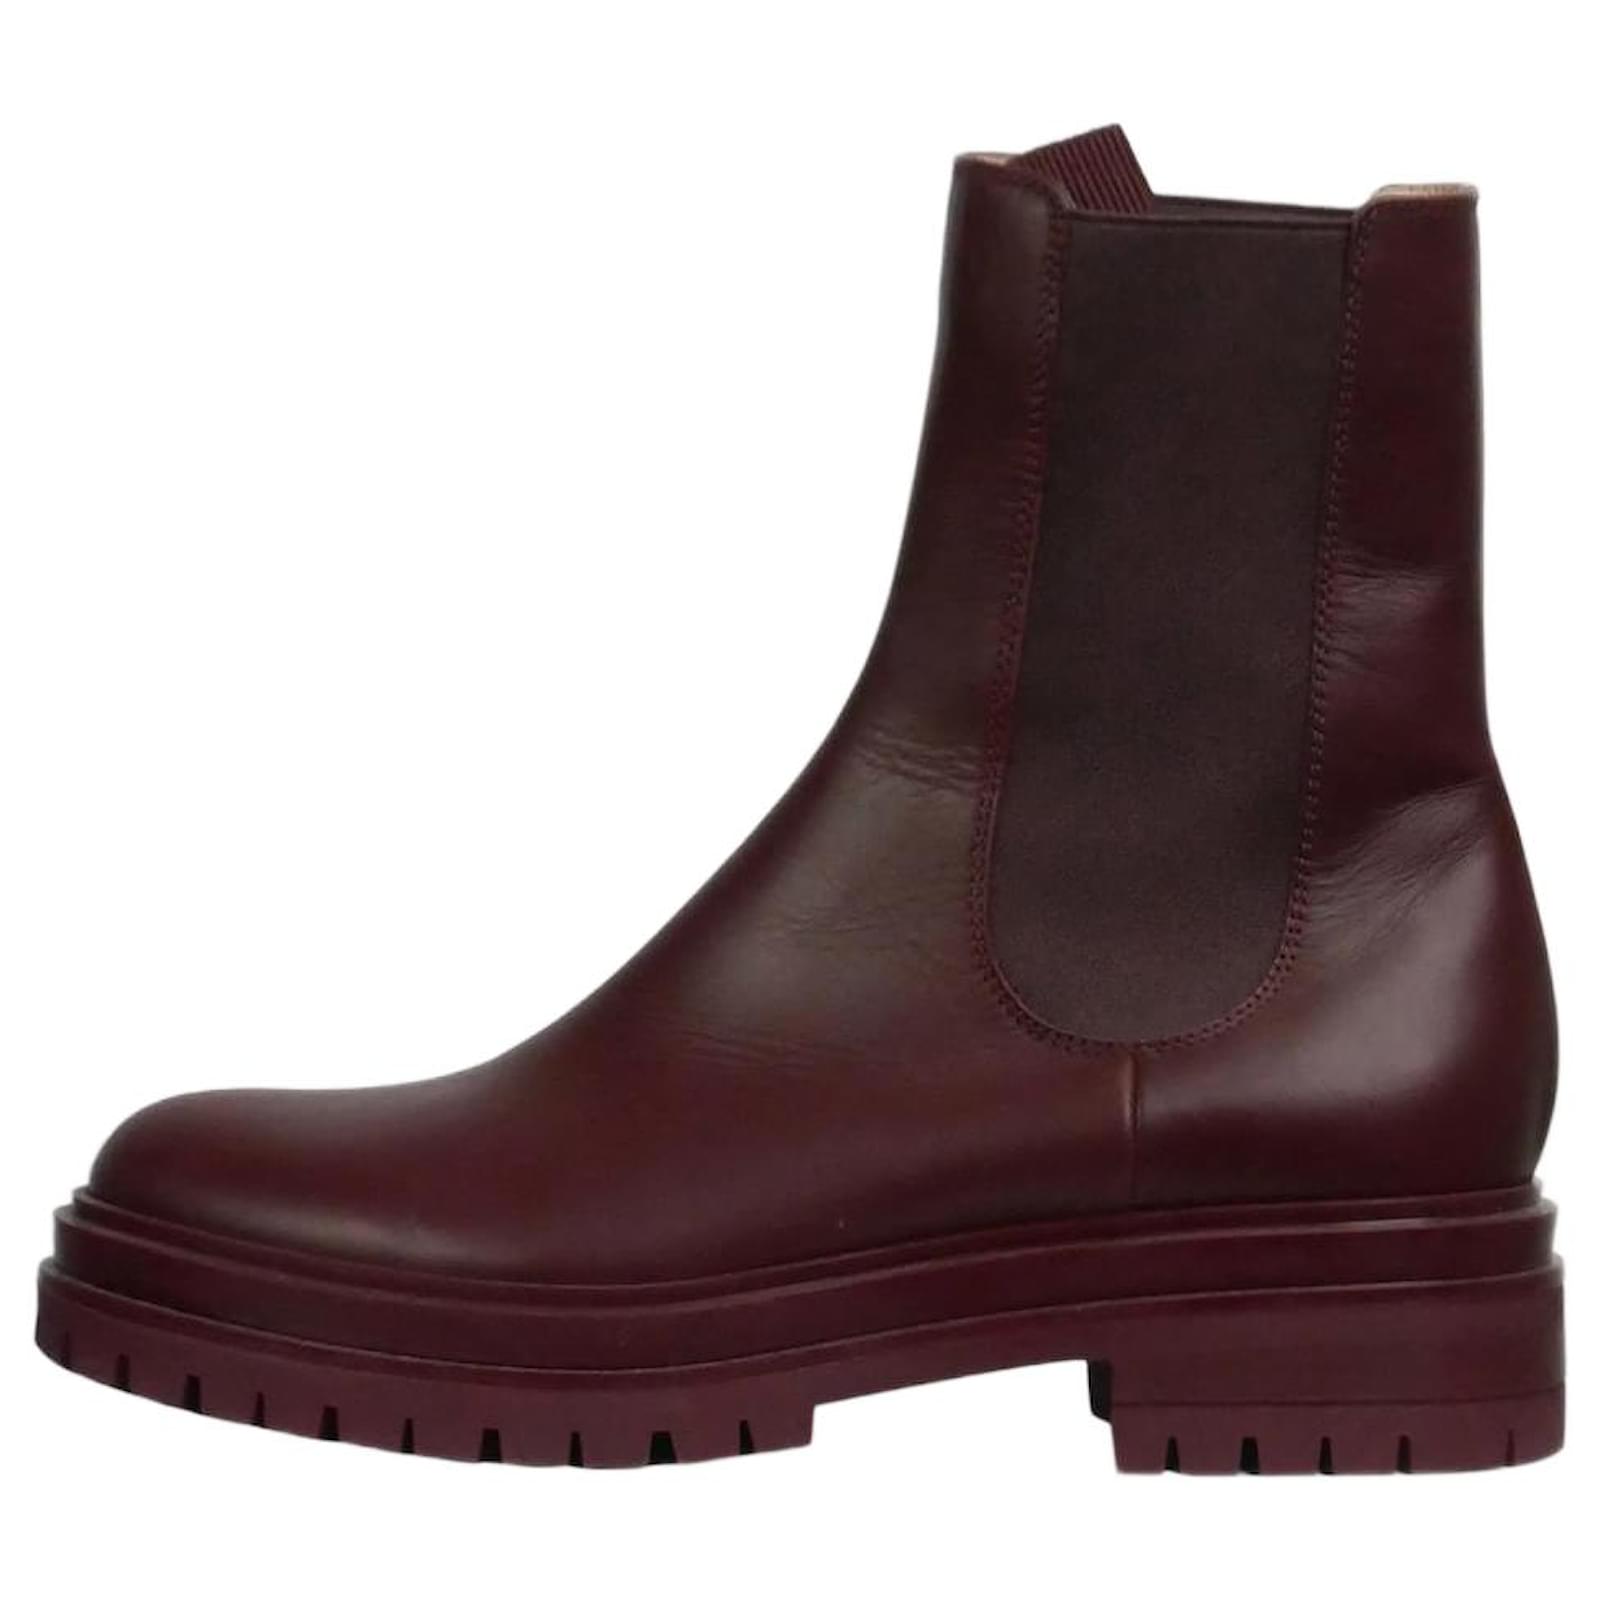 Gianvito Rossi Burgundy leather chunky Chelsea boots - size EU 38